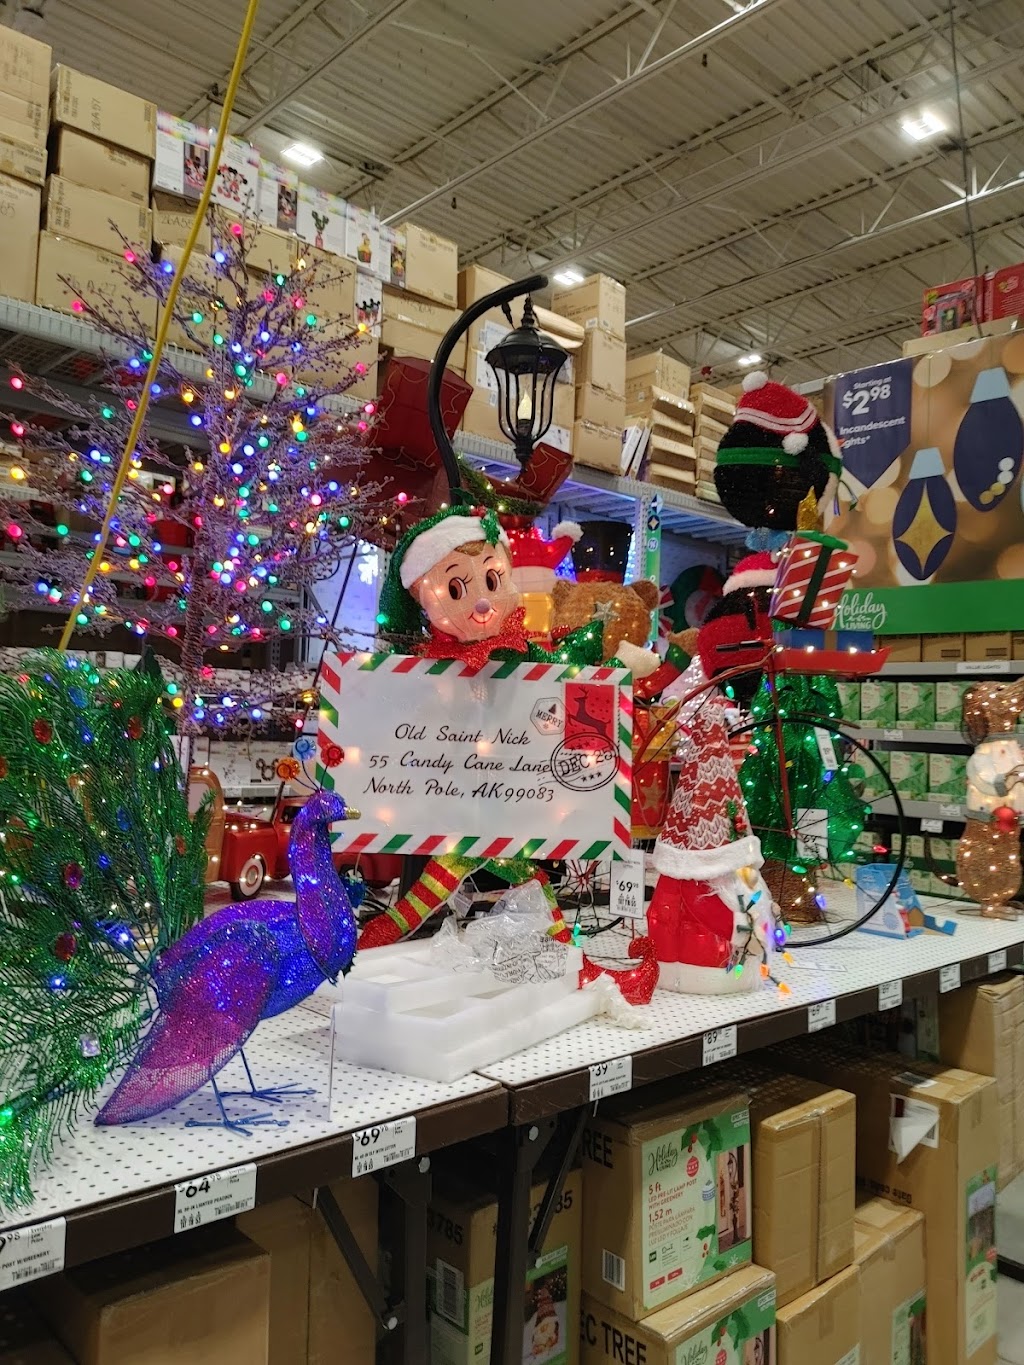 Lowes Garden Center | 1941 South Rd, Poughkeepsie, NY 12601 | Phone: (845) 298-4720